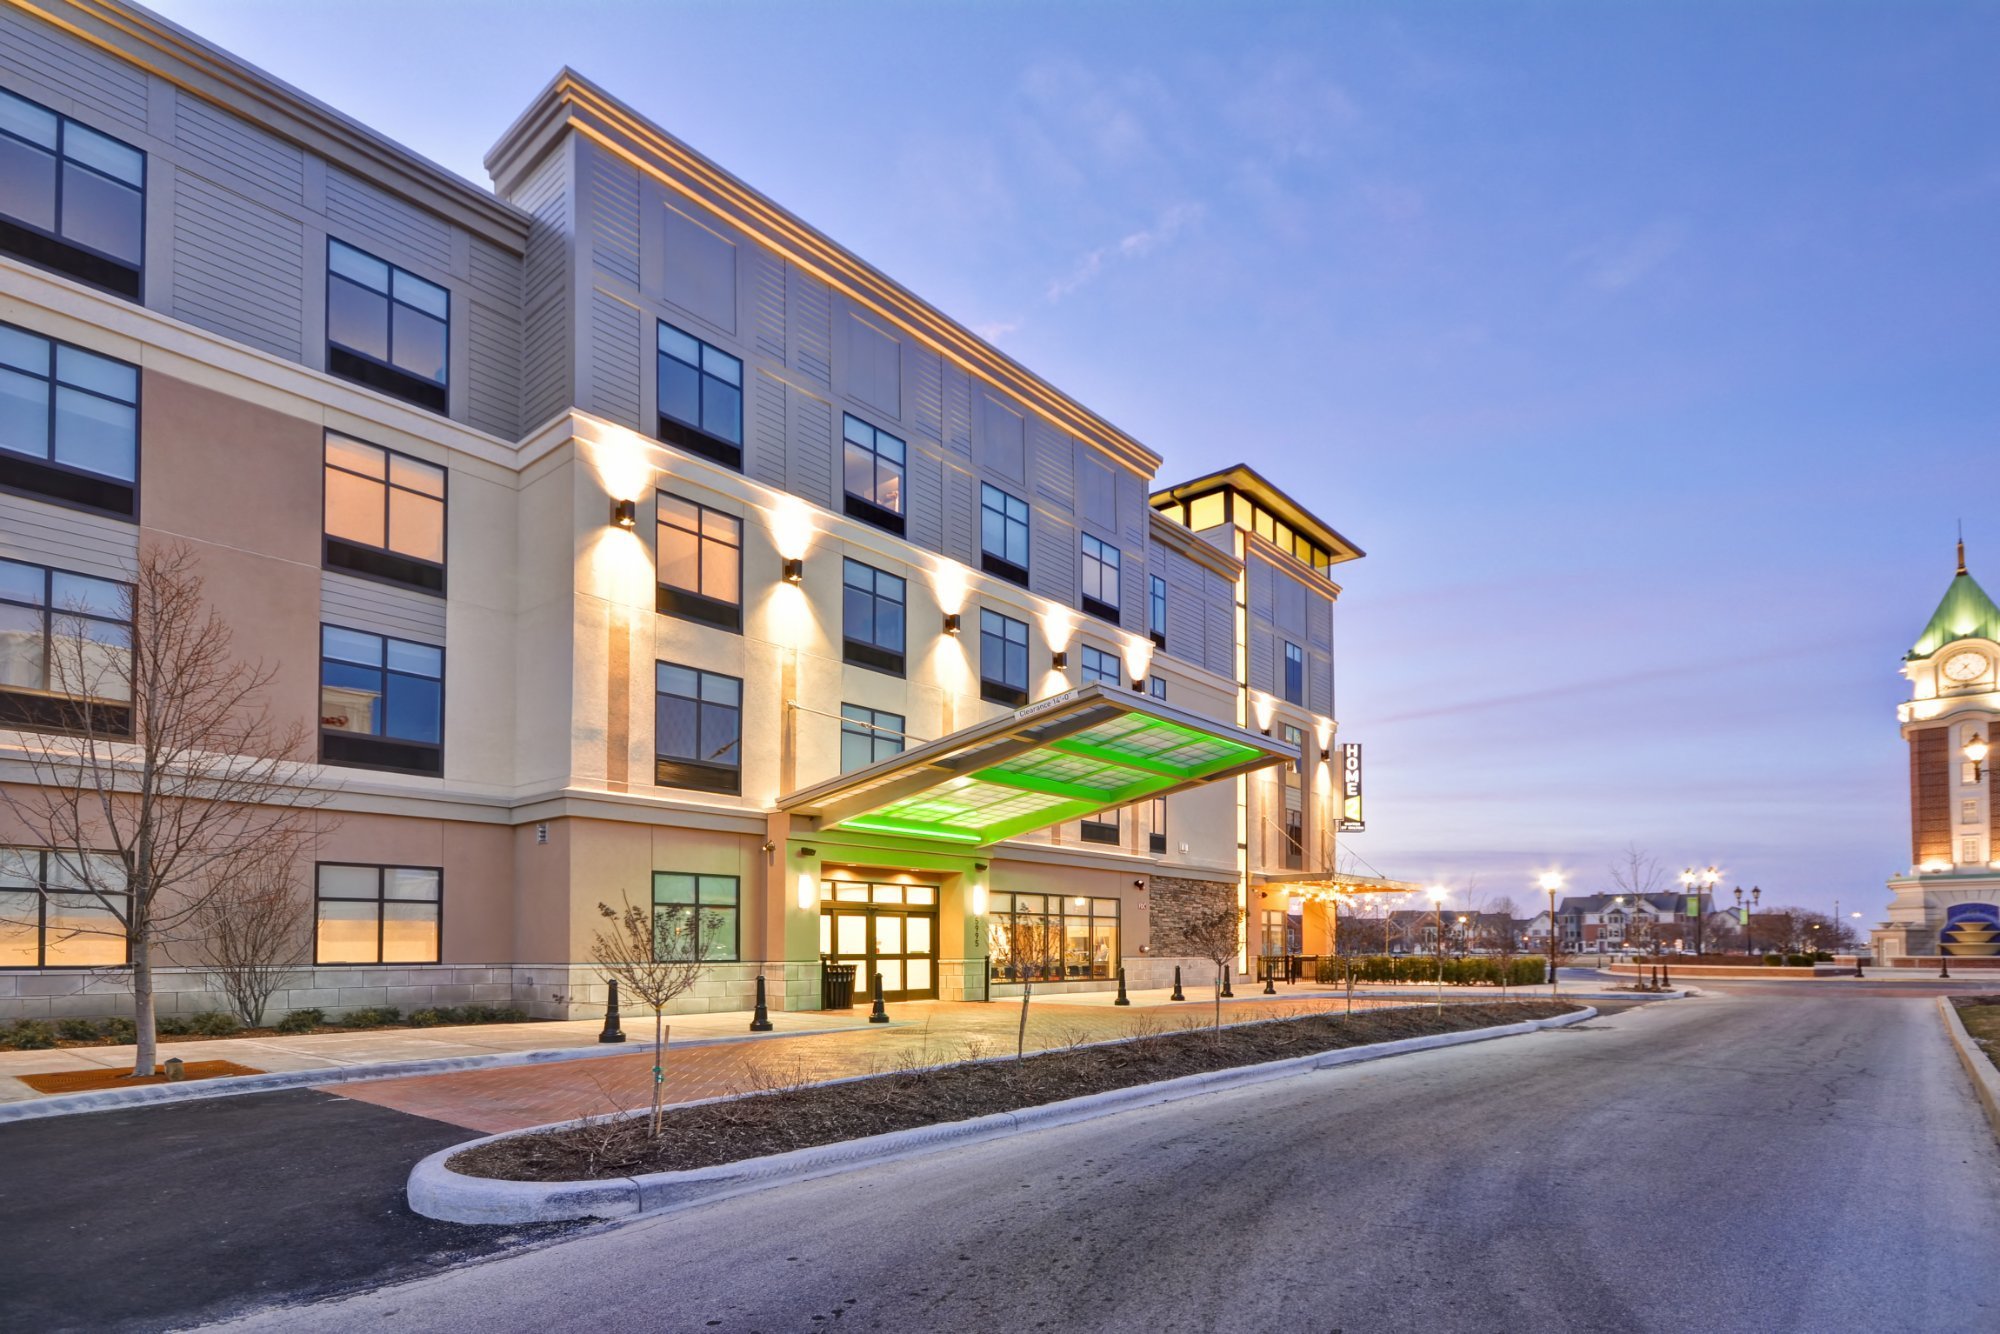 Photo of Home2 Suites by Hilton Perrysburg Levis Commons Toledo, Perrysburg, OH